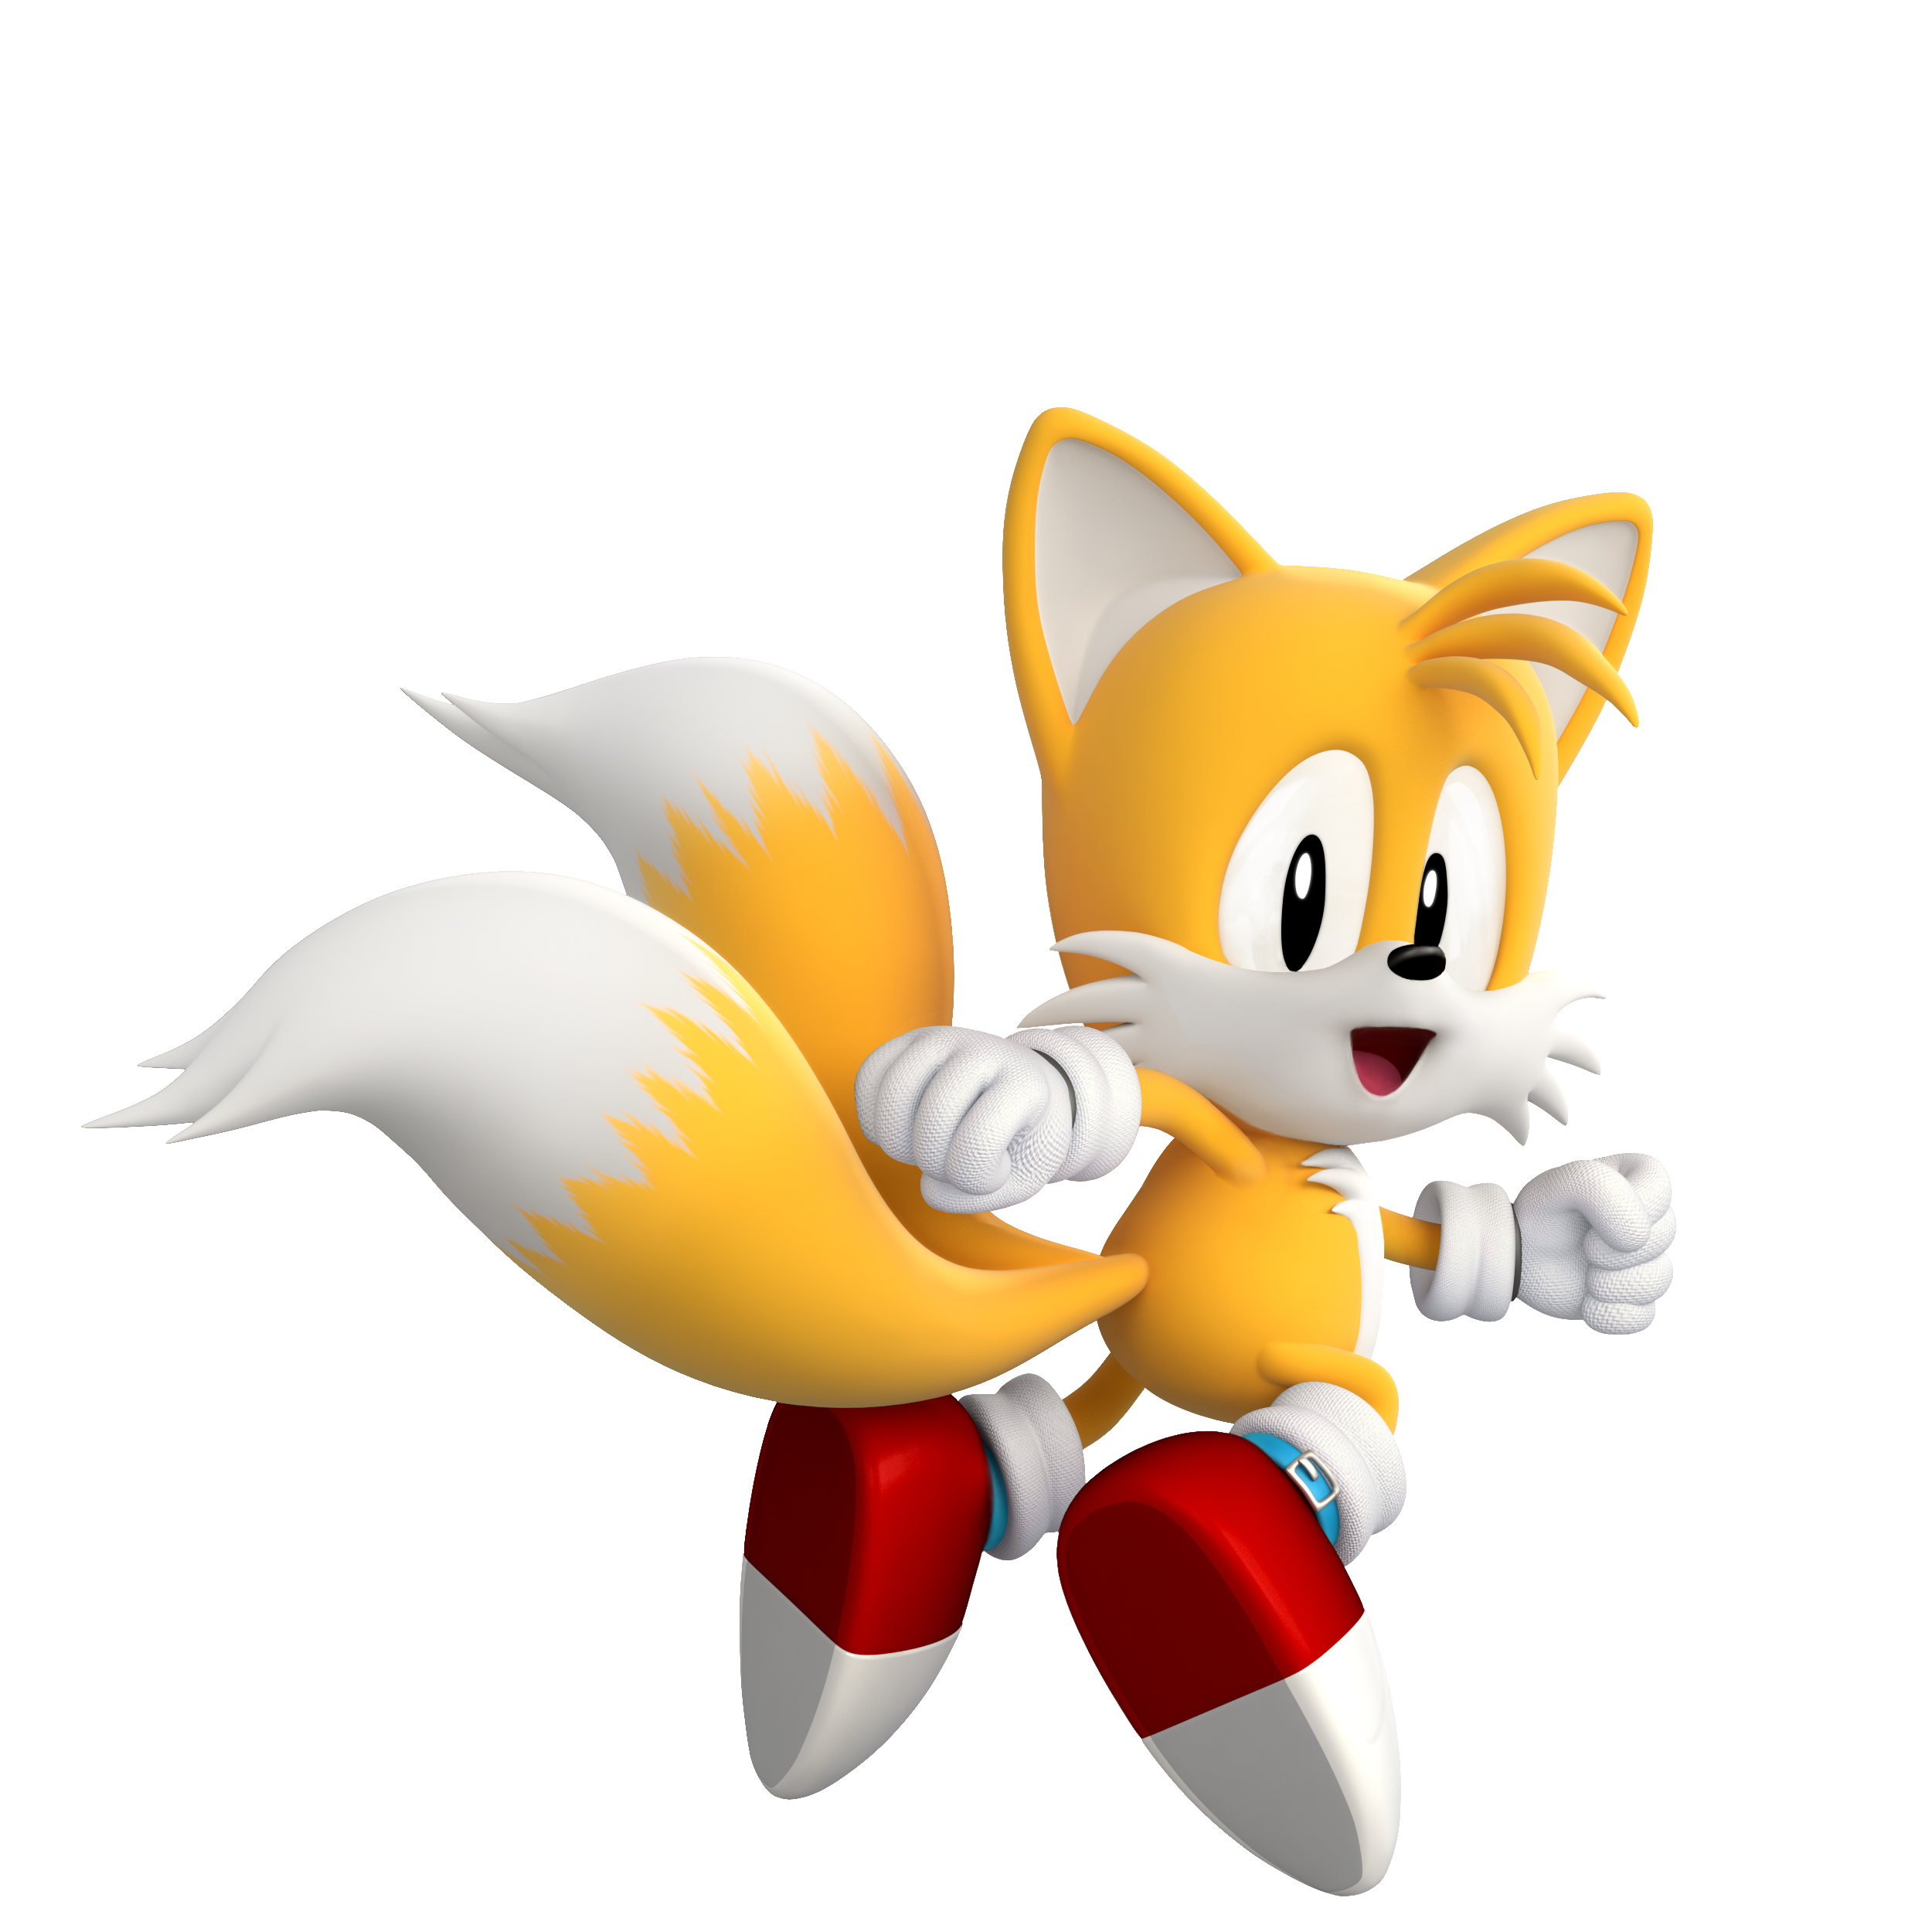 Tails in Sonic the Hedgehog - Sonic Retro